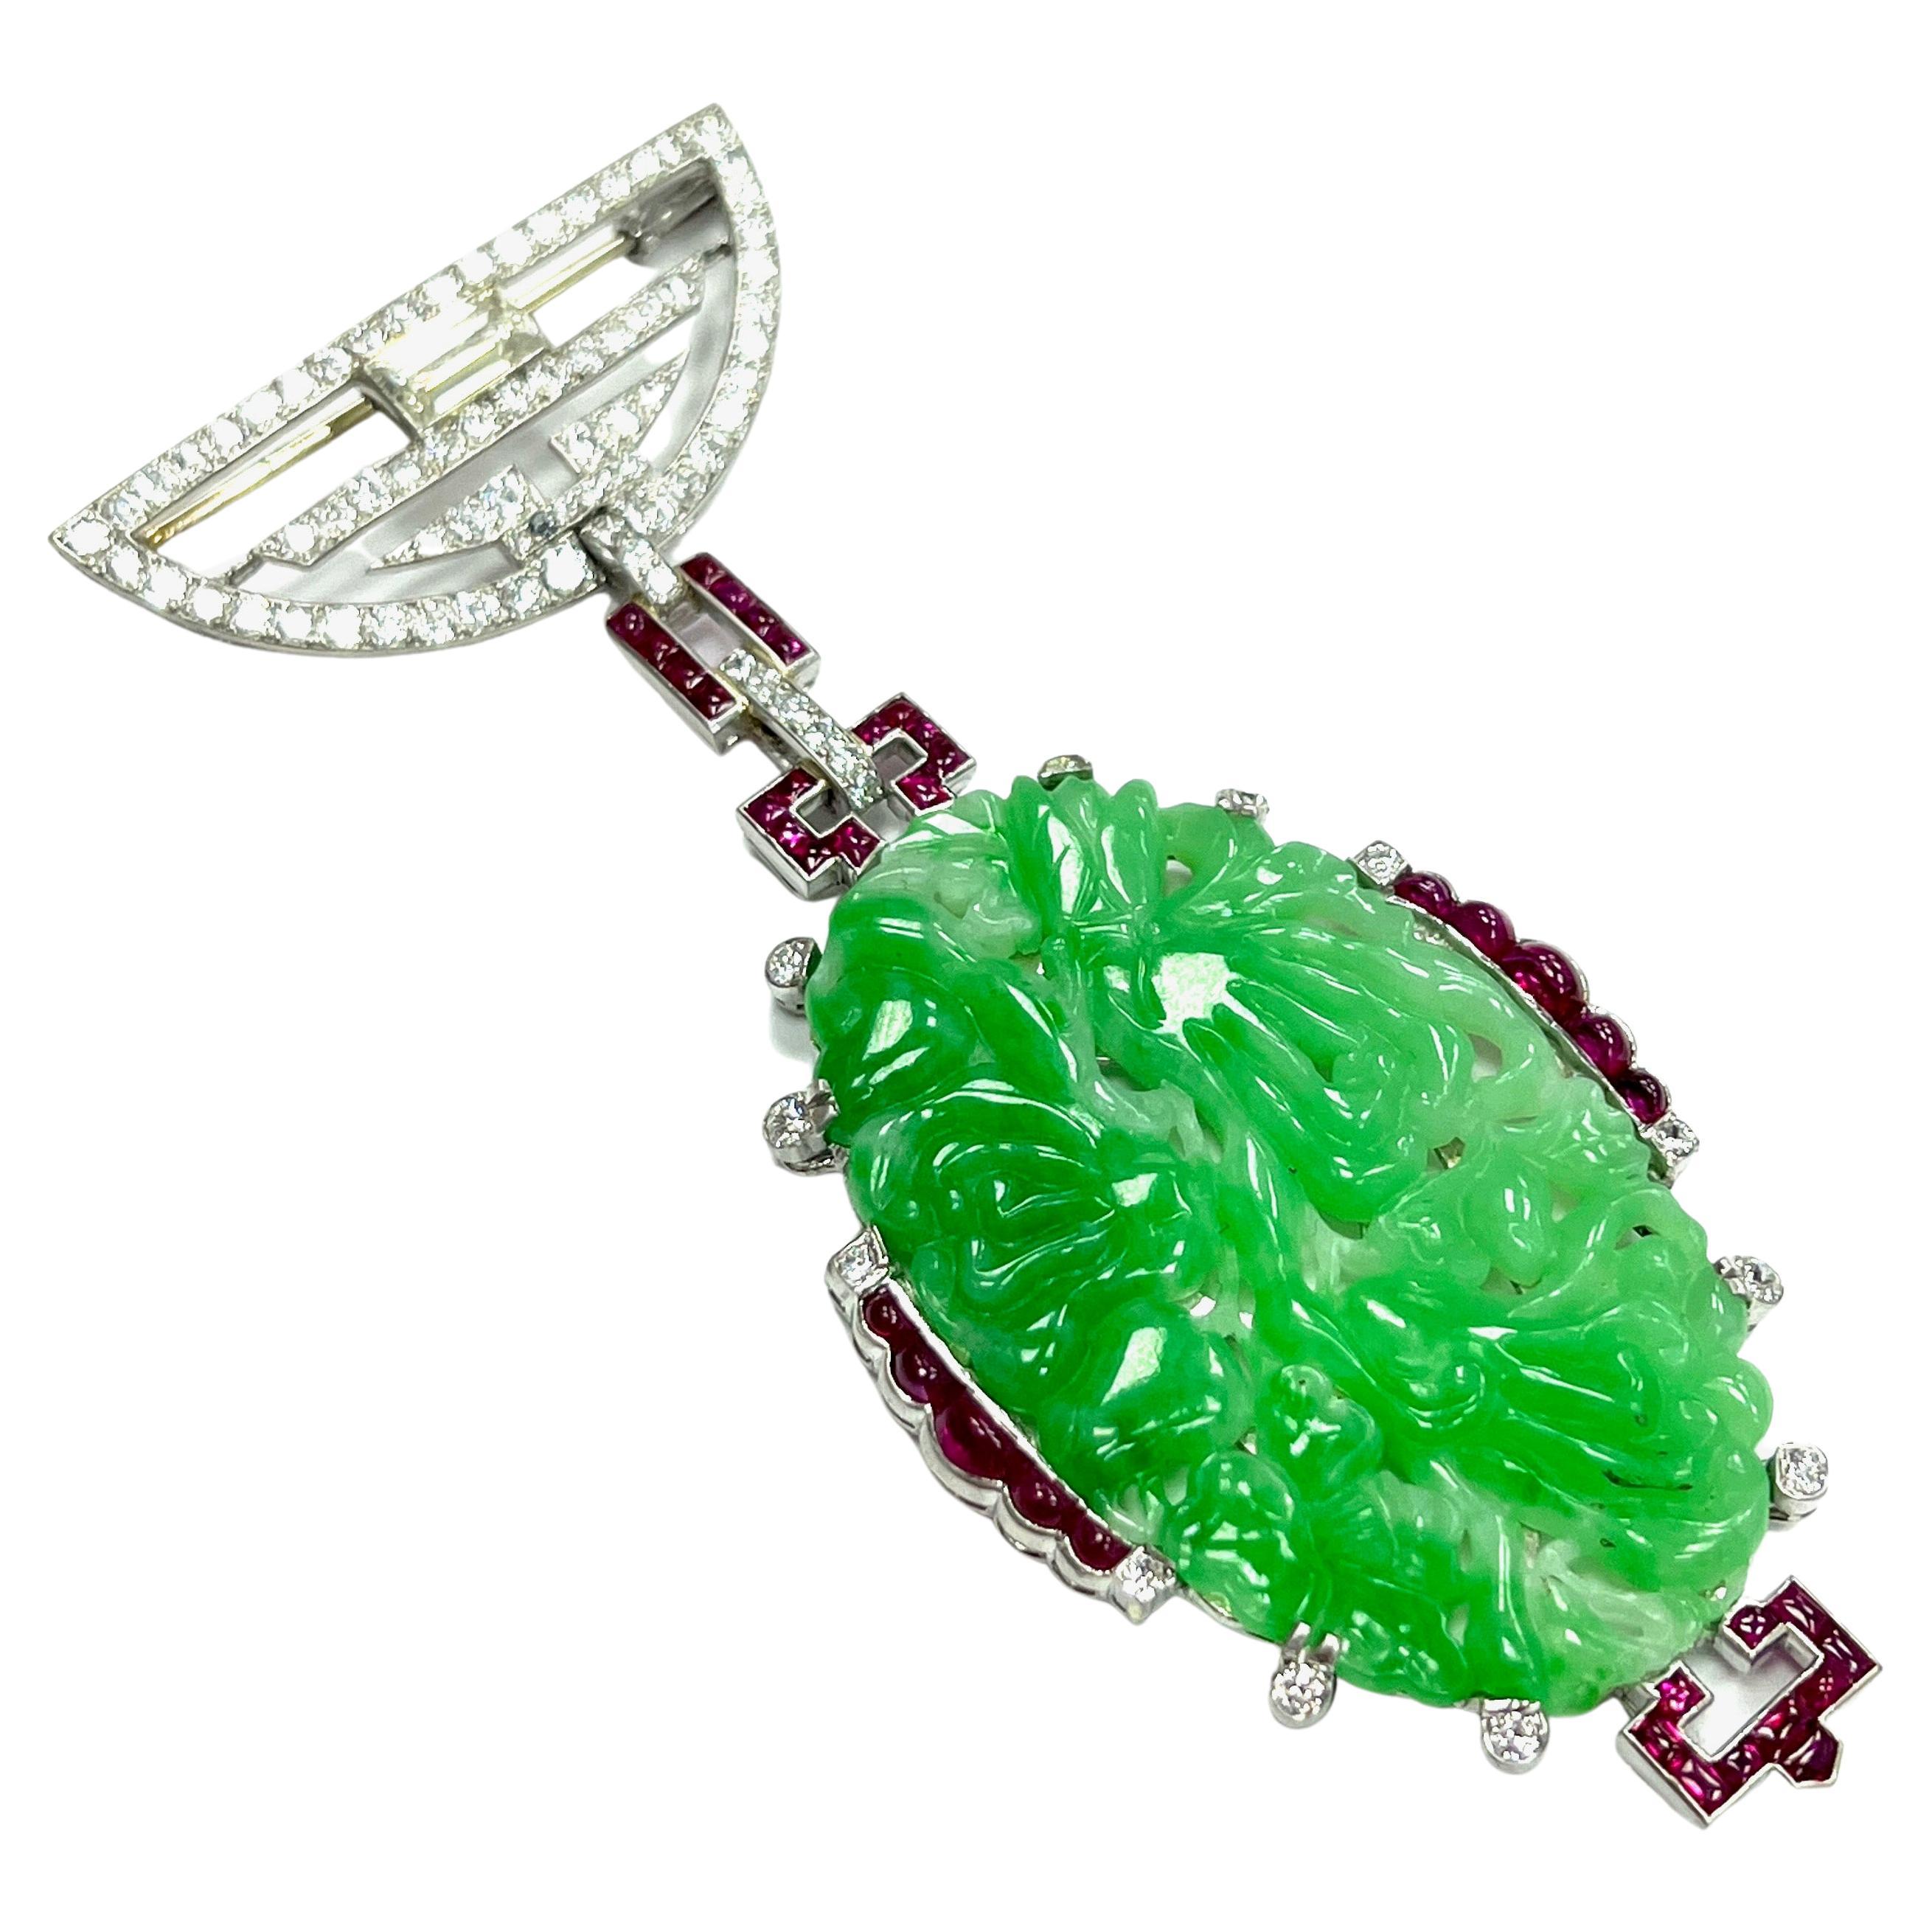 Marchak Paris Large Carved Jade Diamond Ruby Brooch

Beautiful art deco large carved jade (31 x 51.5 mm) with one main emerald-cut diamond of 1.25 carats; smaller diamonds weigh a total of approximately 2.5 carats; and cabochon and square-cut